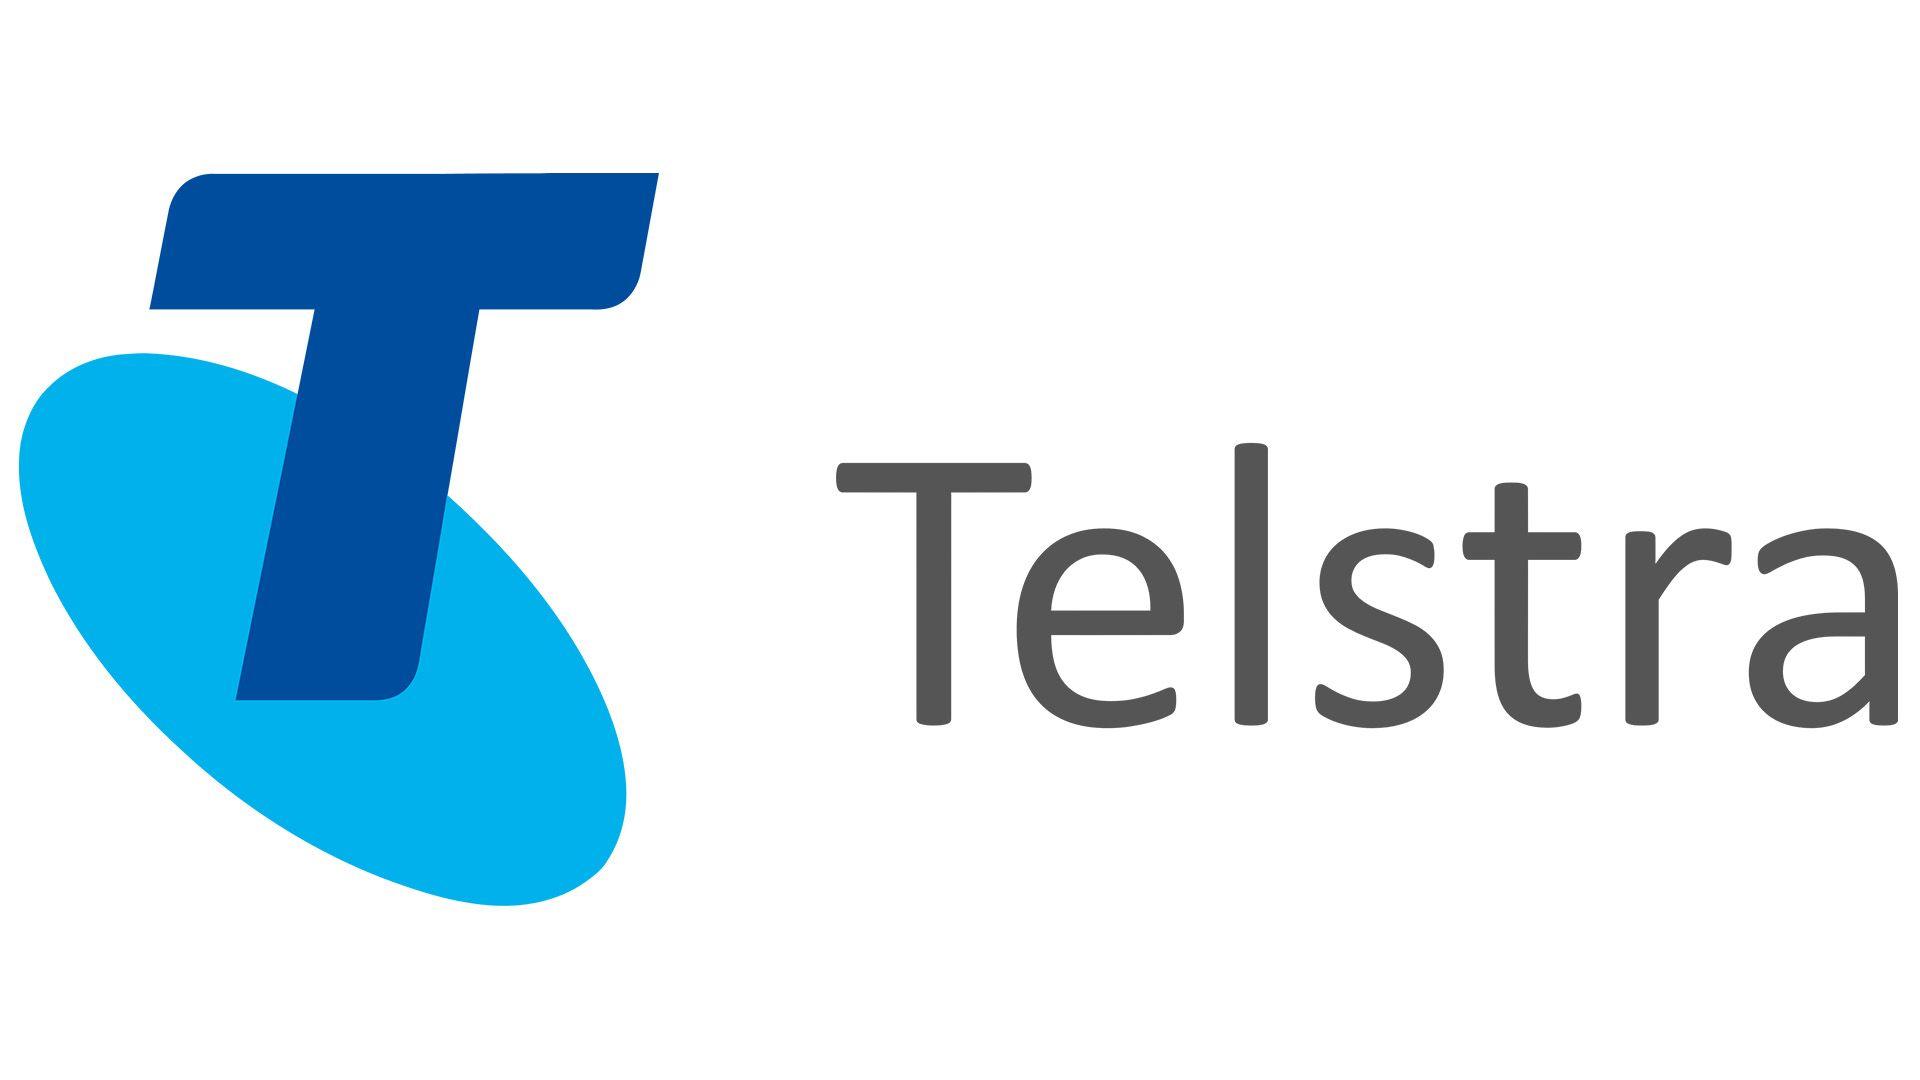 Telstra Logo - Telstra logo, Telstra Symbol, Meaning, History and Evolution